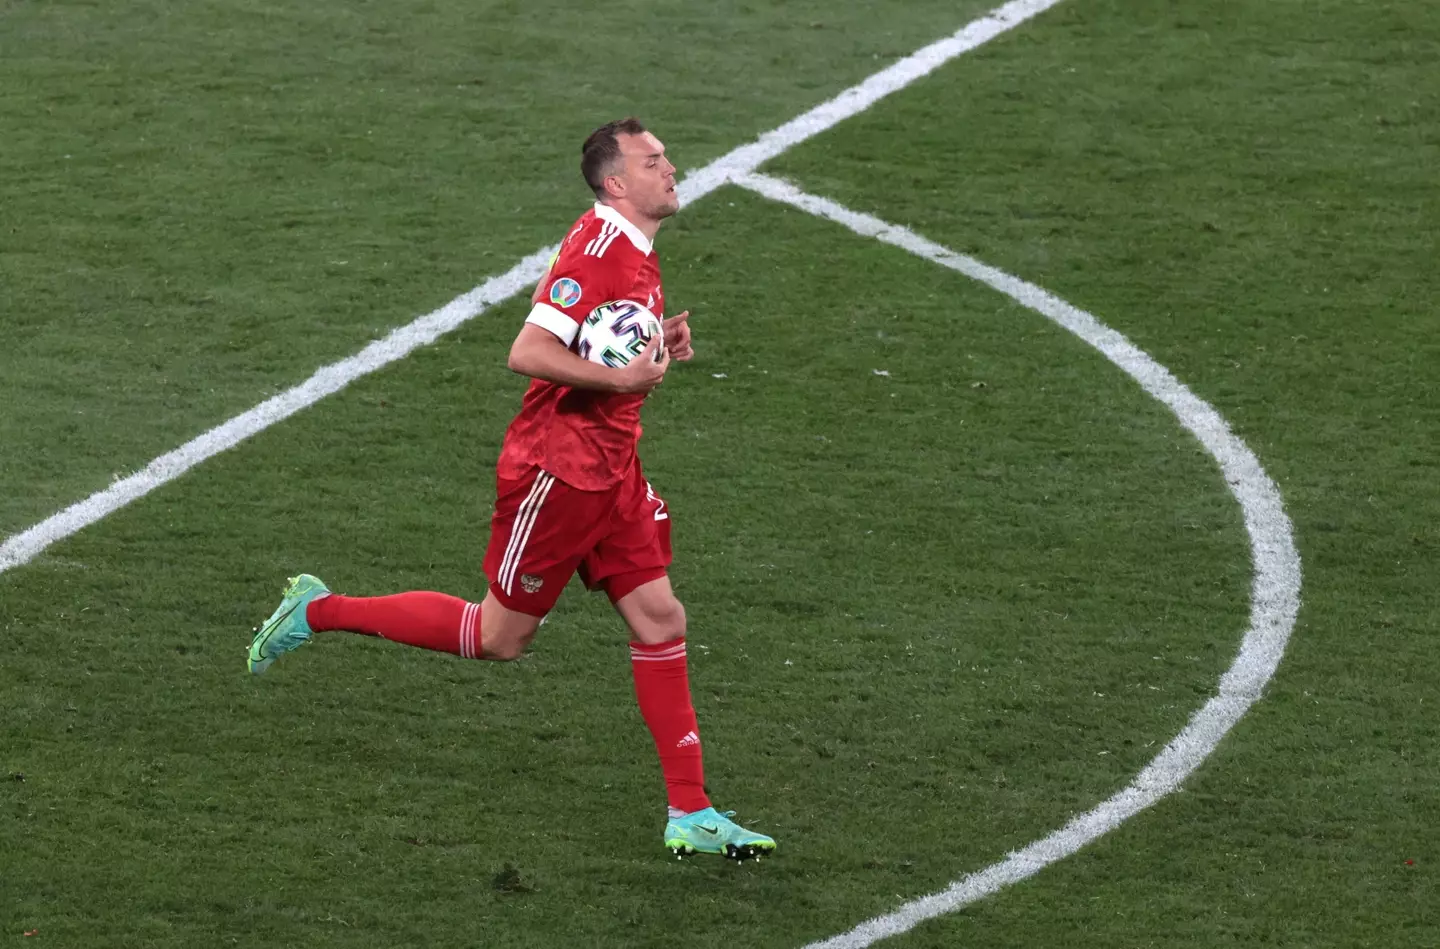 Dzyuba playing for Russia during Euro 2020. Image: PA Images